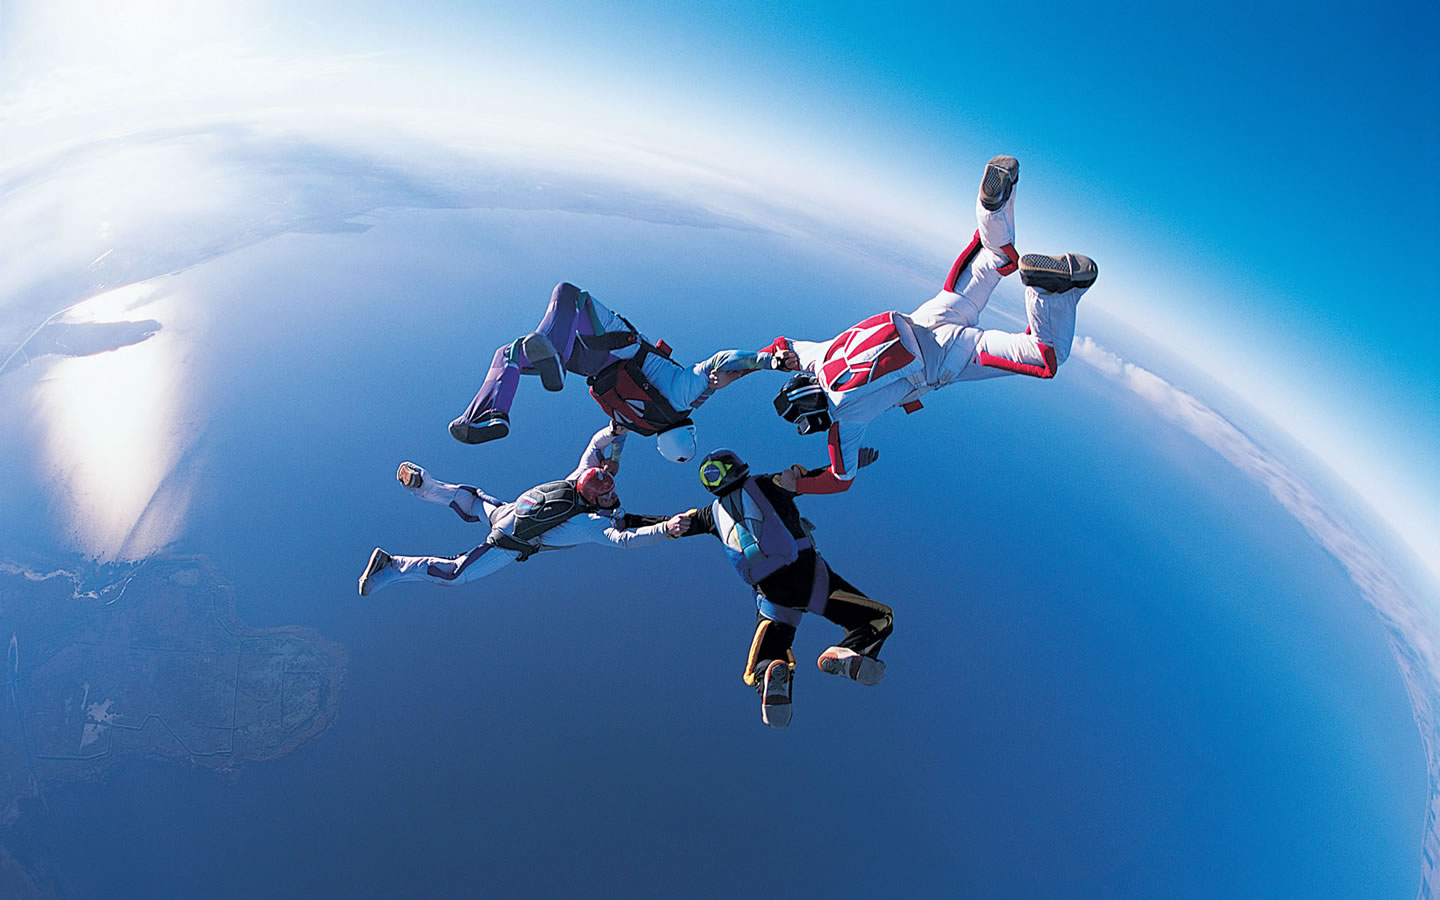 sports wallpapers hd,parachuting,air sports,extreme sport,jumping,atmosphere